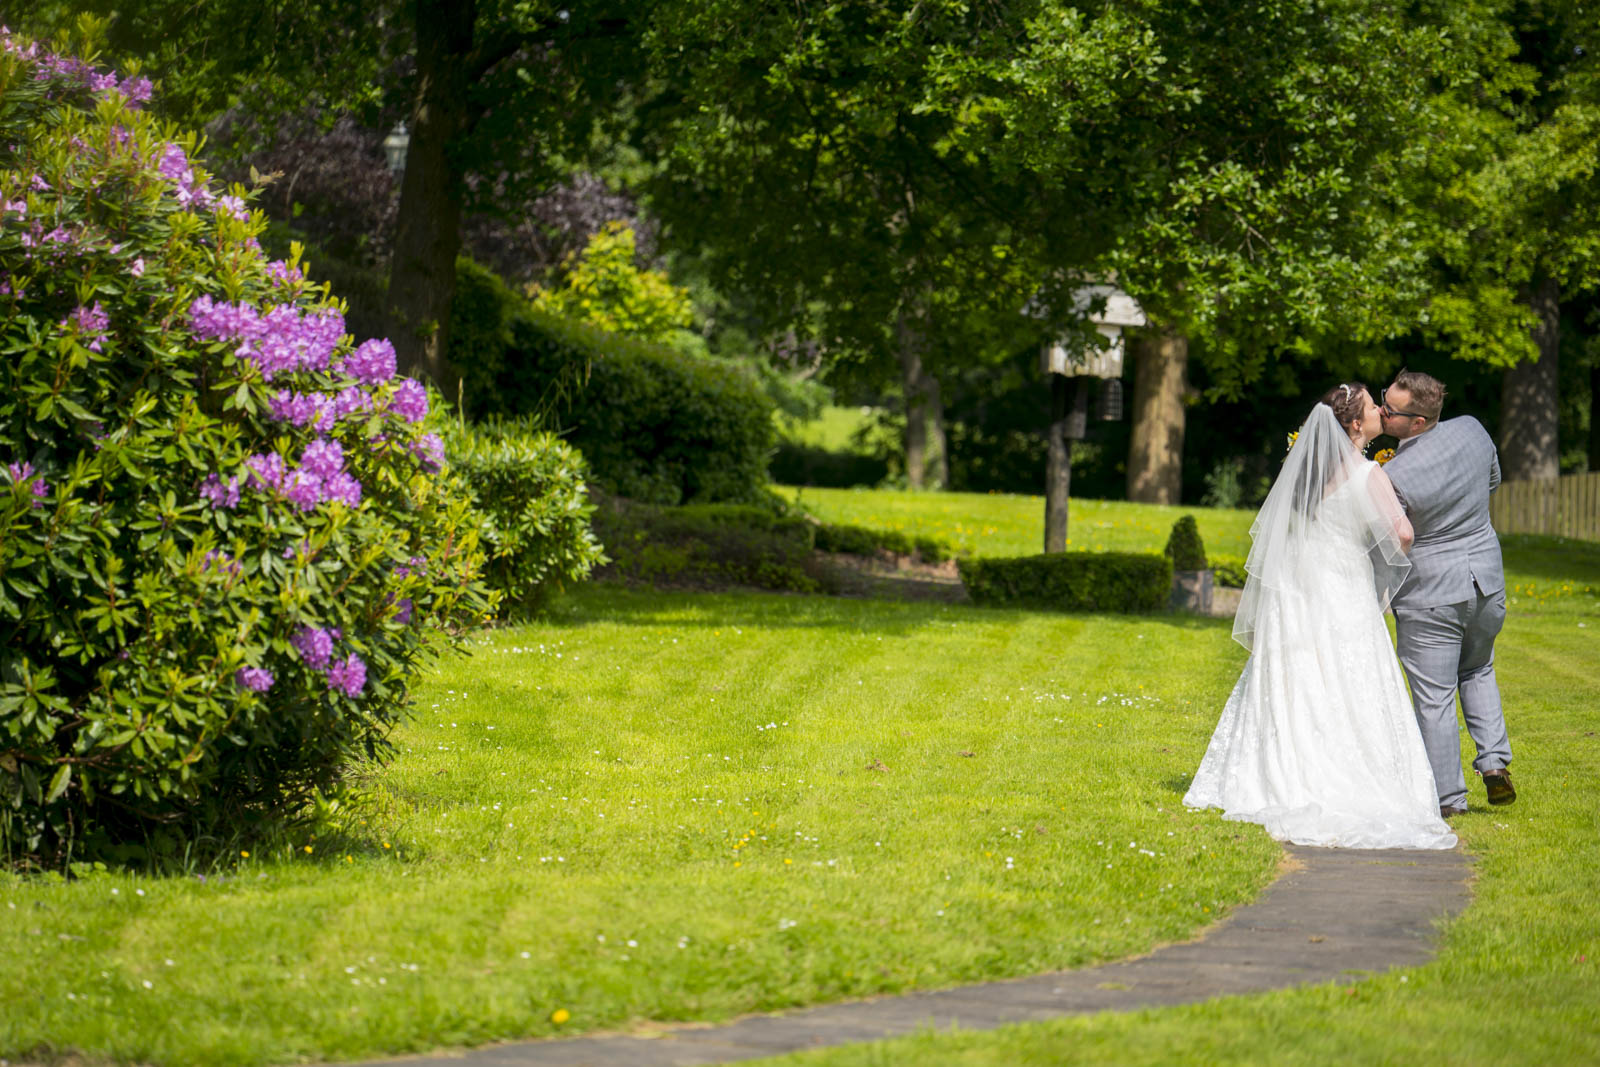 The bride and groom take a moment away to walk the grounds together natural wedding photography